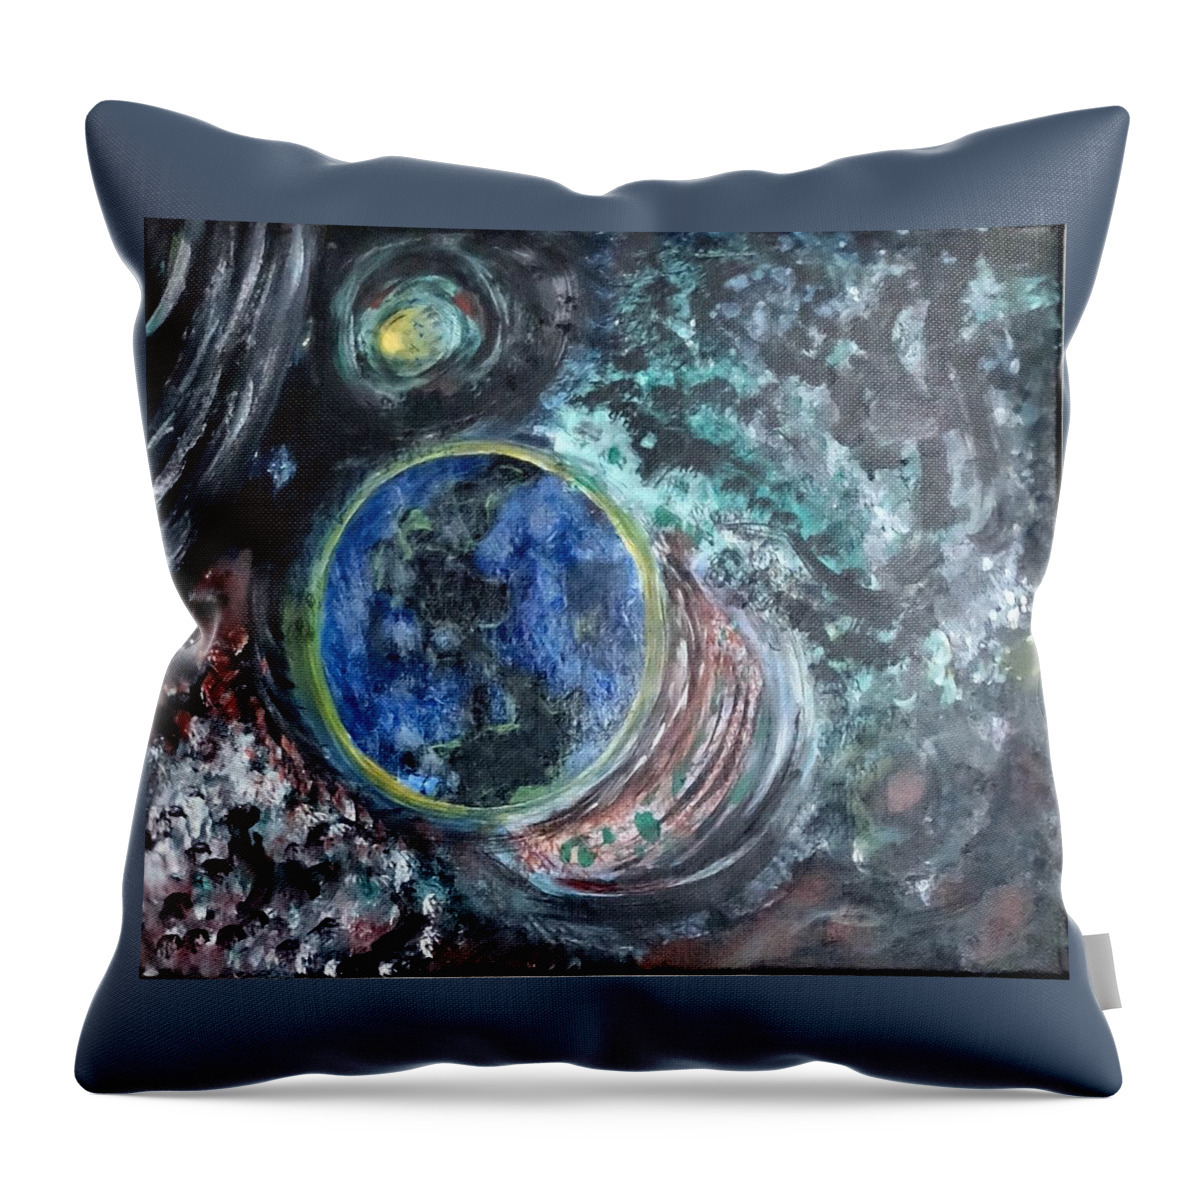 Milk Way Throw Pillow featuring the painting Milky Way Galaxy by Suzanne Berthier